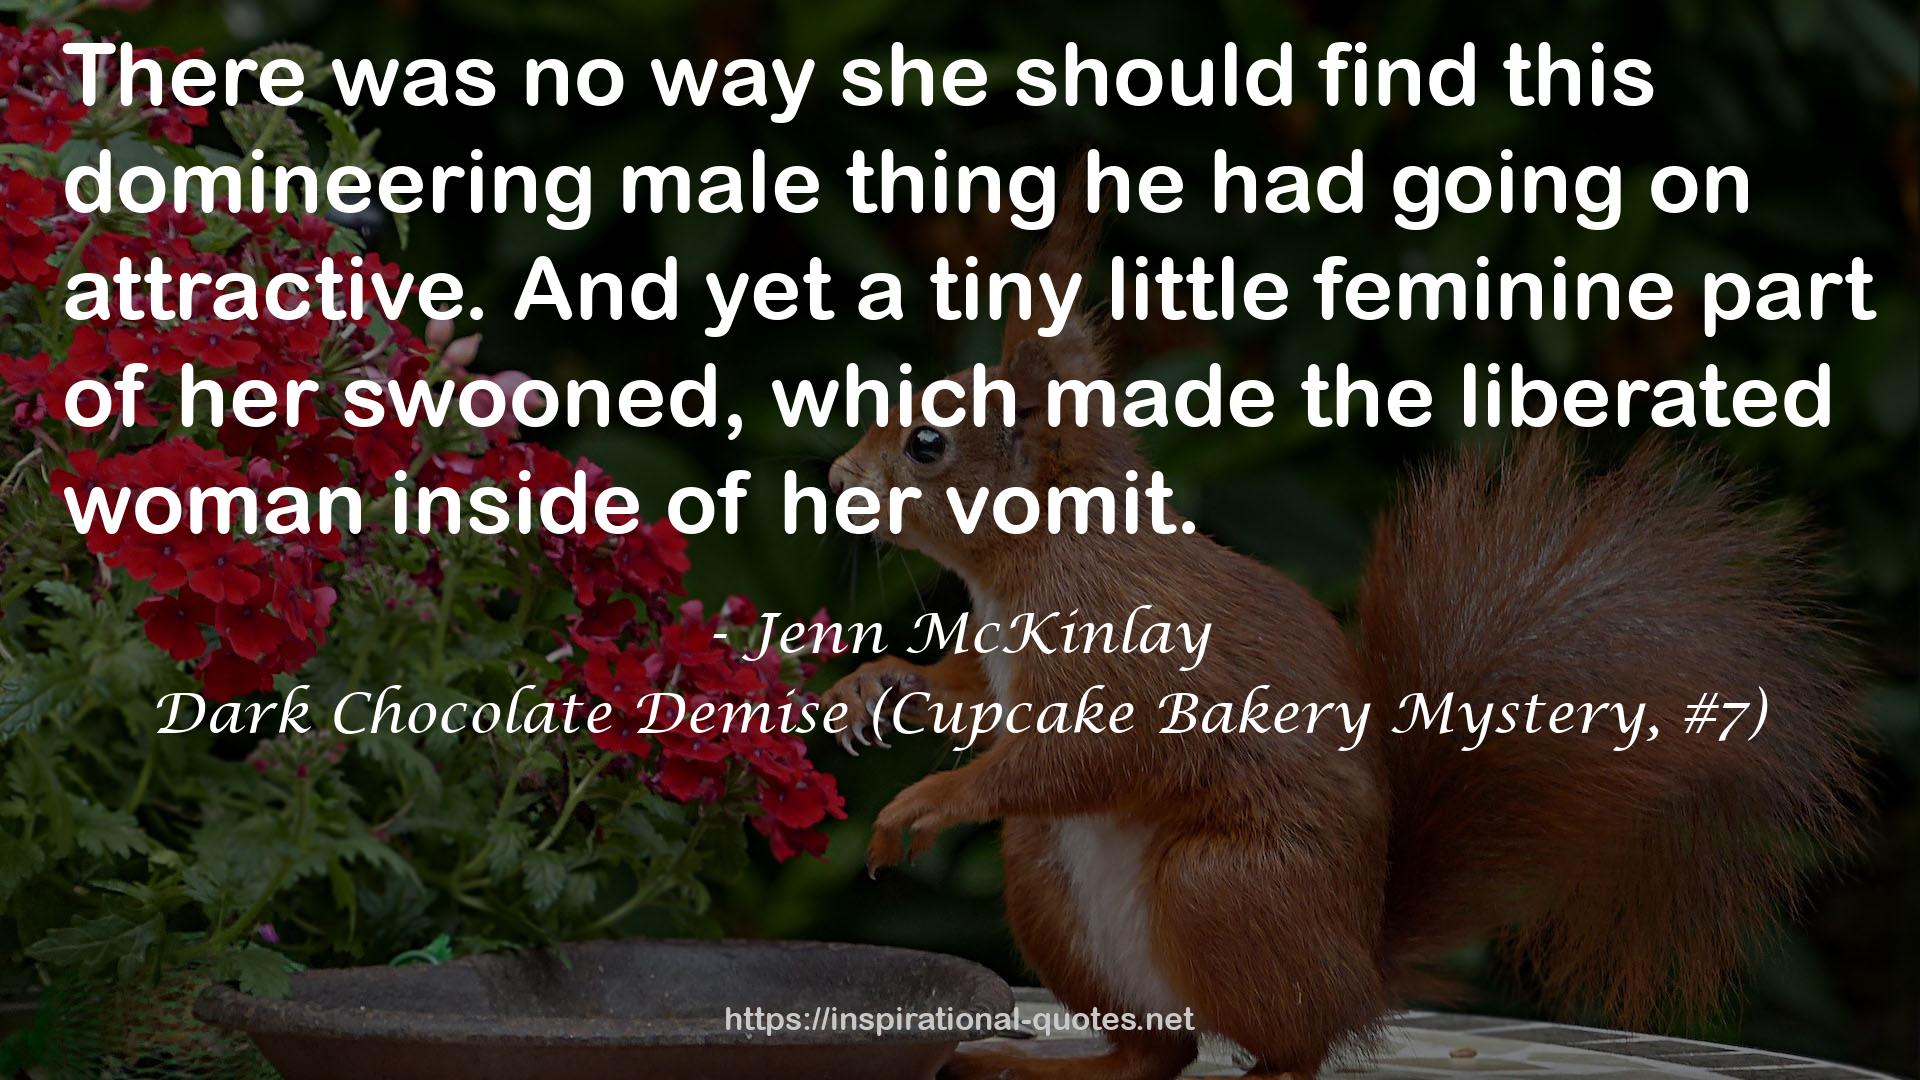 Dark Chocolate Demise (Cupcake Bakery Mystery, #7) QUOTES